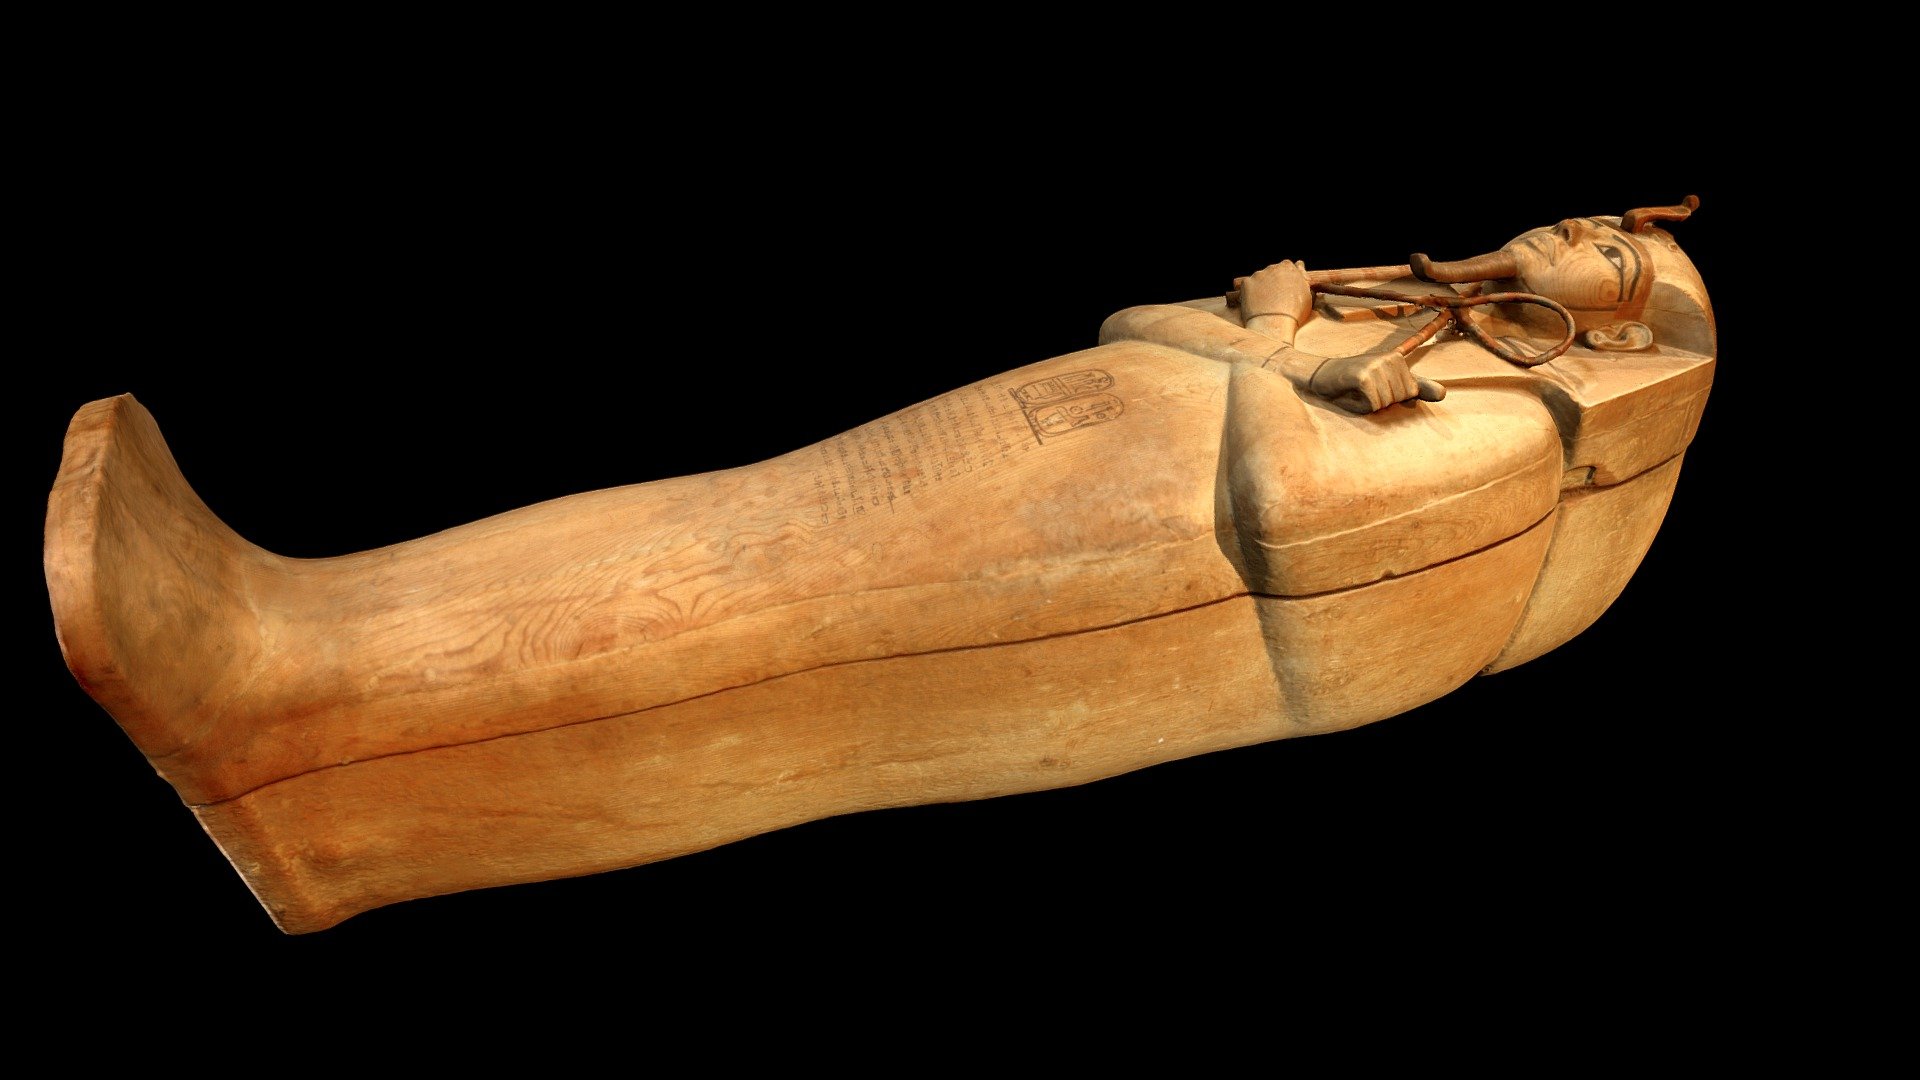 Wooden coffin of pharaoh Ramses II in the Egyptian Museum, Cairo, Egypt (CG 61020).  This is the wooden coffin in which the mummified remains of Ramses II were found when it was recovered as part of the Royal Mummy Cache in tomb DB320.  His tomb had been opened in antiquity and his mummy removed from its original coffin, rewrapped and placed in this reused coffin before being reburied.  It has been argued that this wooden coffin was originally made to house the remains of pharaoh Horemheb, before being reused for the reburial of Ramses II 3d model